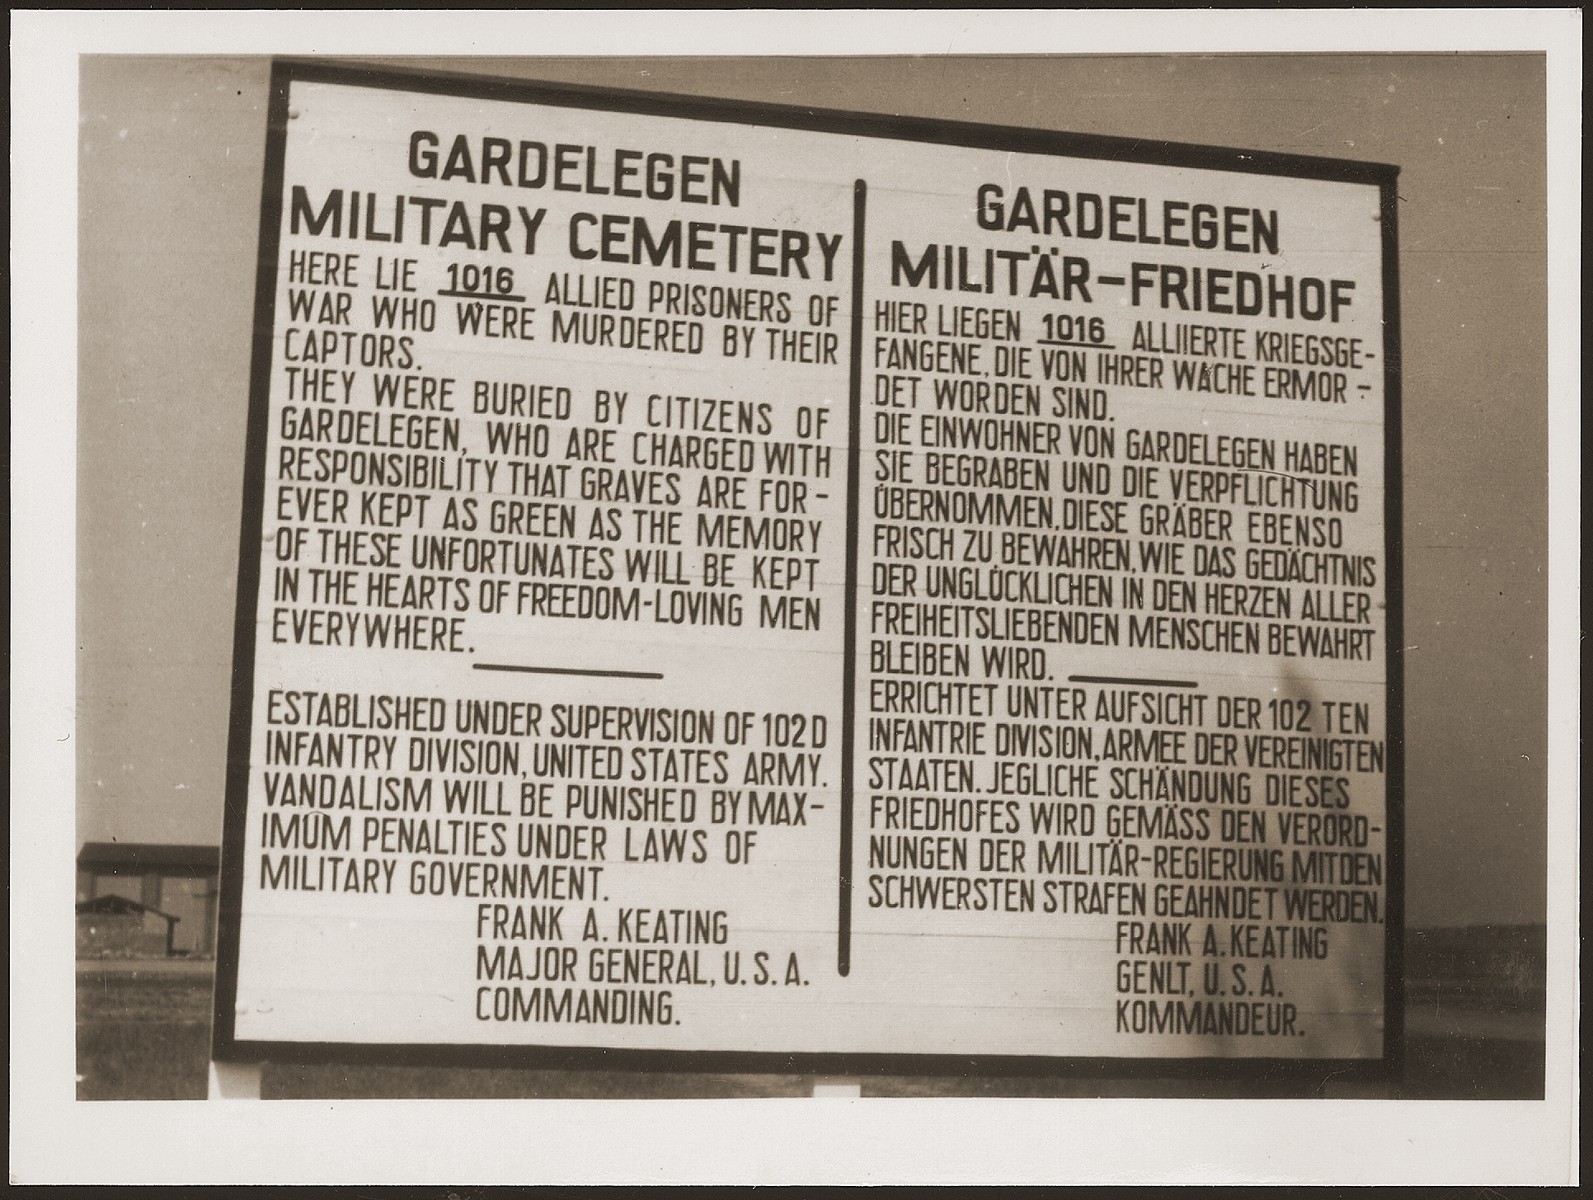 A sign erected at the Military Cemetery in Gardelegen in memory of 1,016 prisoners who were killed by the SS in a barn near the town.